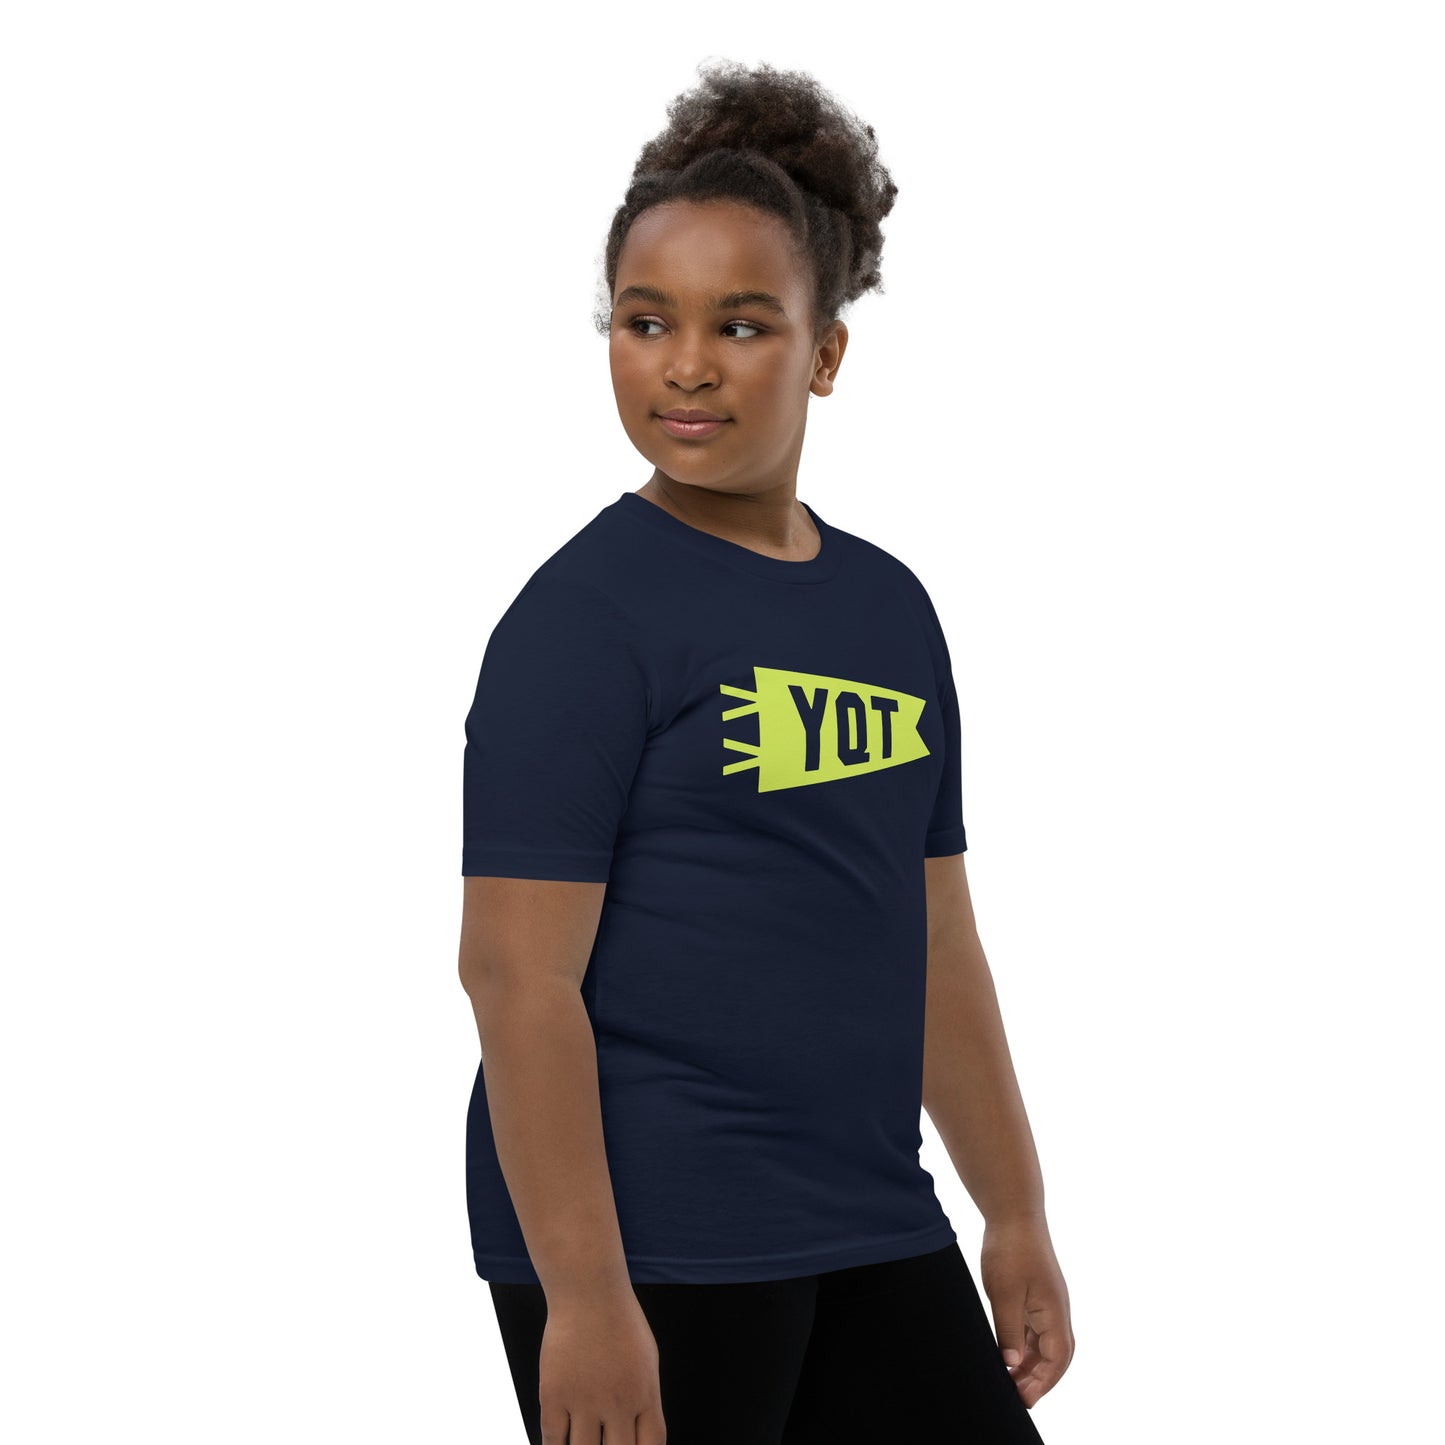 Kid's Airport Code Tee - Green Graphic • YQT Thunder Bay • YHM Designs - Image 03